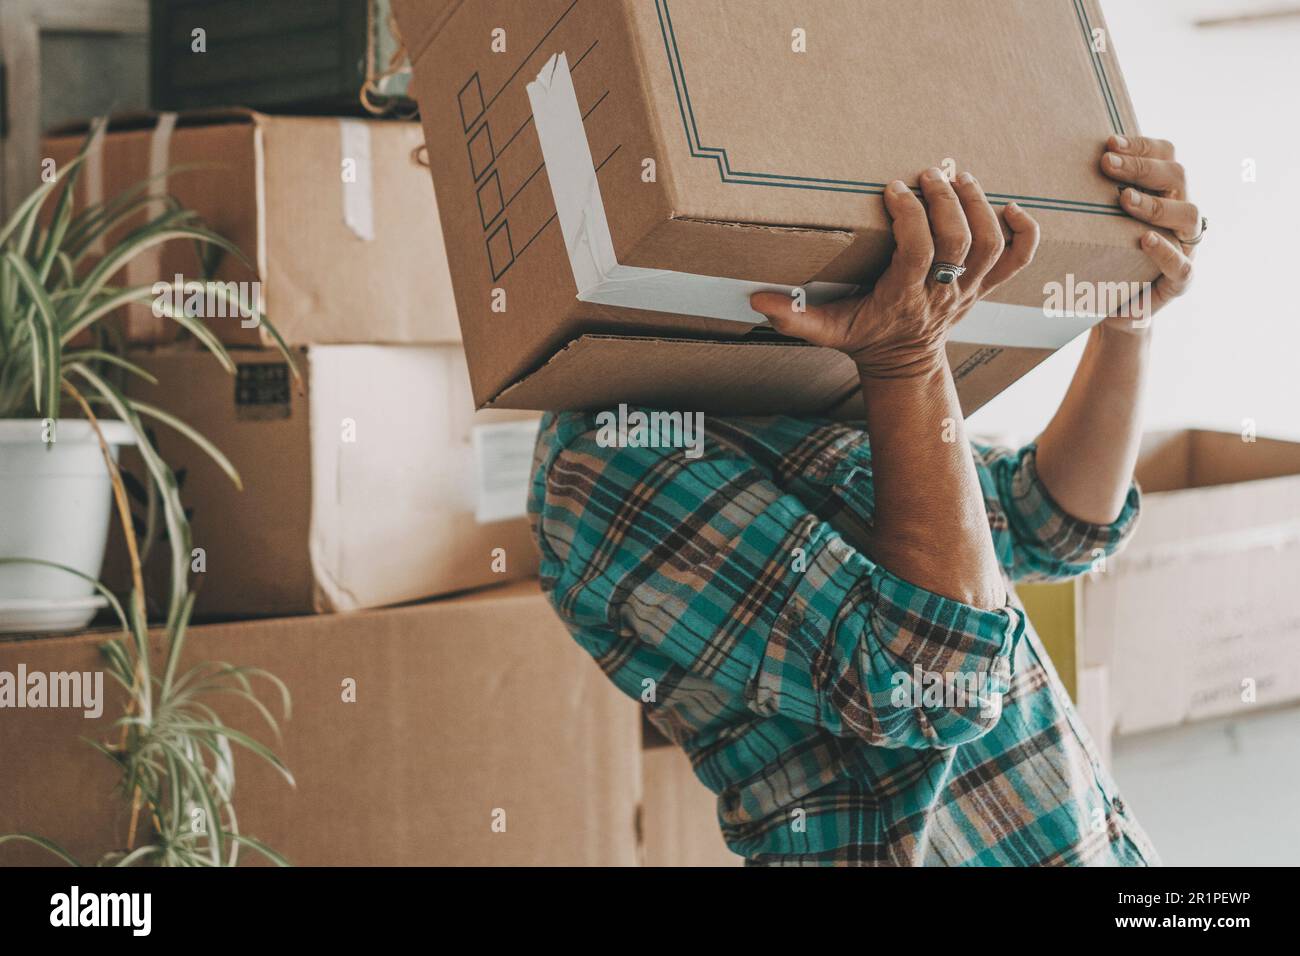 One woman lifting up heavy cardboard box during relocation moving house activity alone. Mortgage. New beginnings adventure female people single lifestyle. Changing life. Home indoors lifestyle people Stock Photo